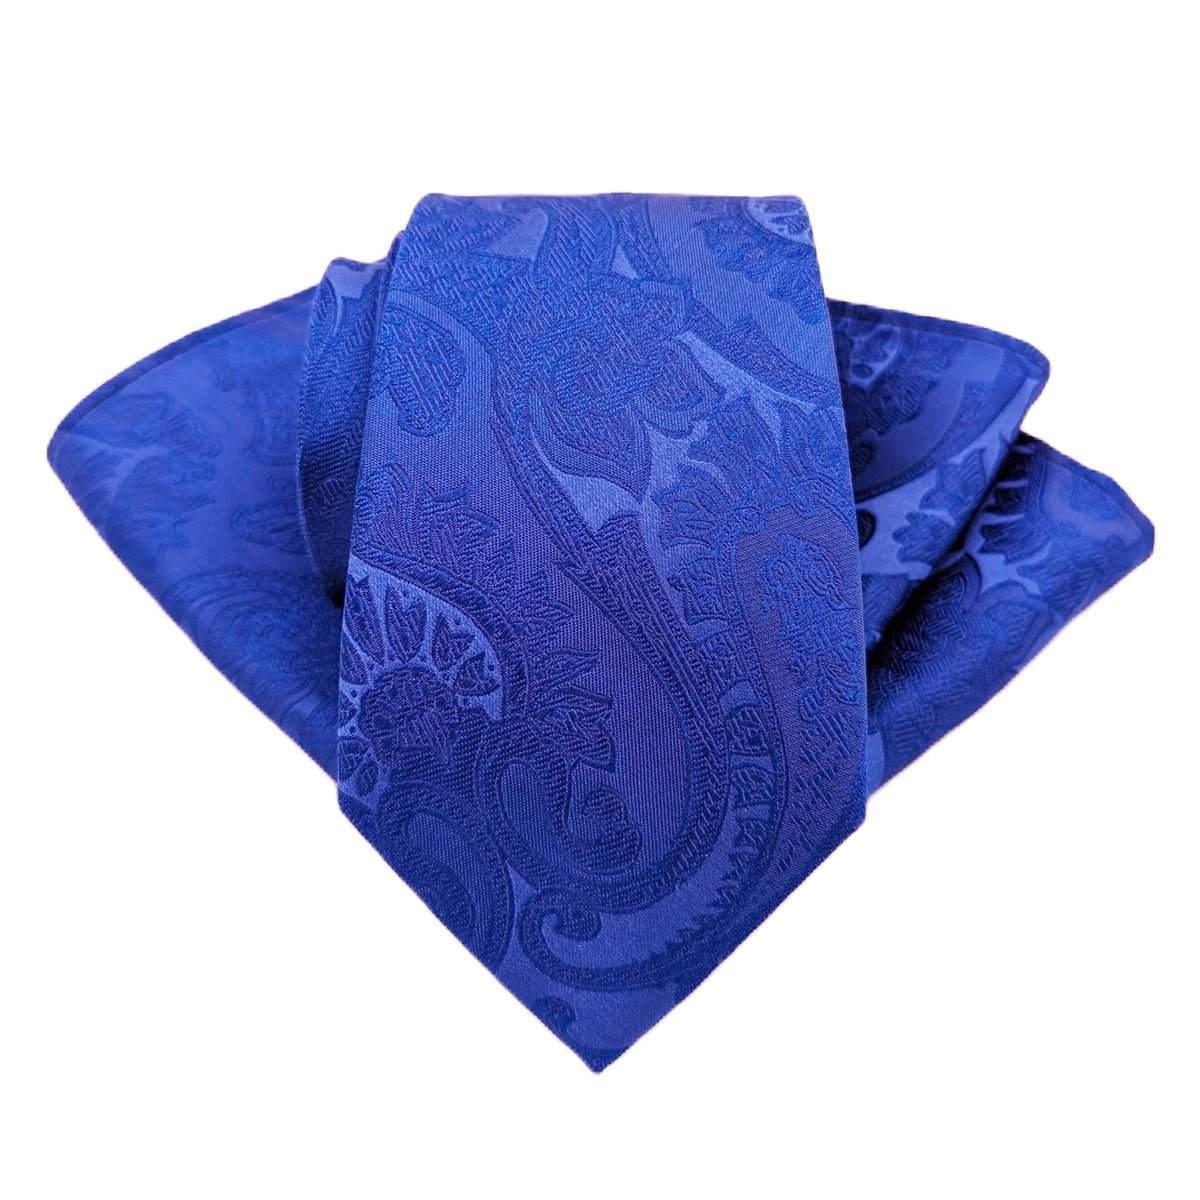 Electric Blue Paisley Silk Pocket Square - Wedding Pocket Square - - Swagger & Swoon